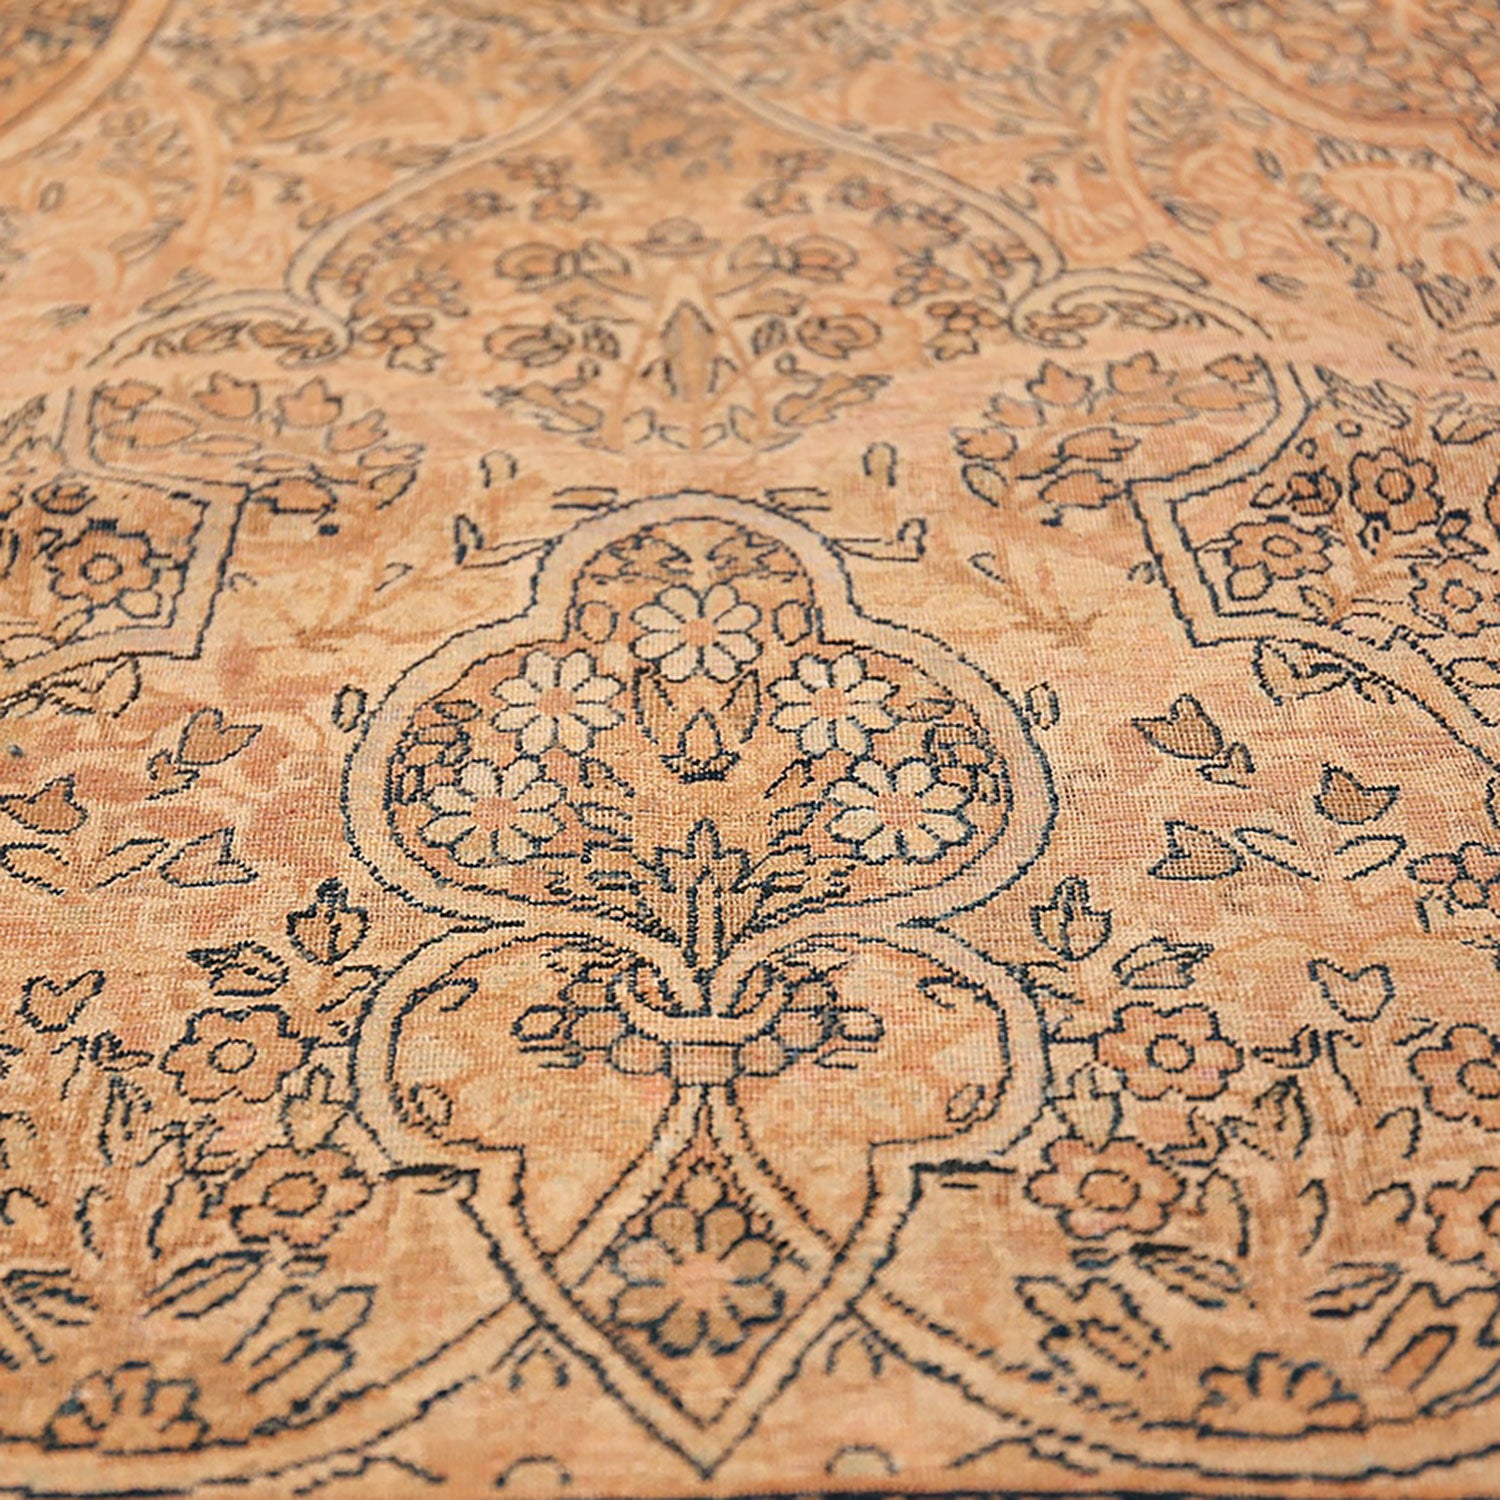 Close-up of an ornate, handwoven carpet with intricate floral motifs.